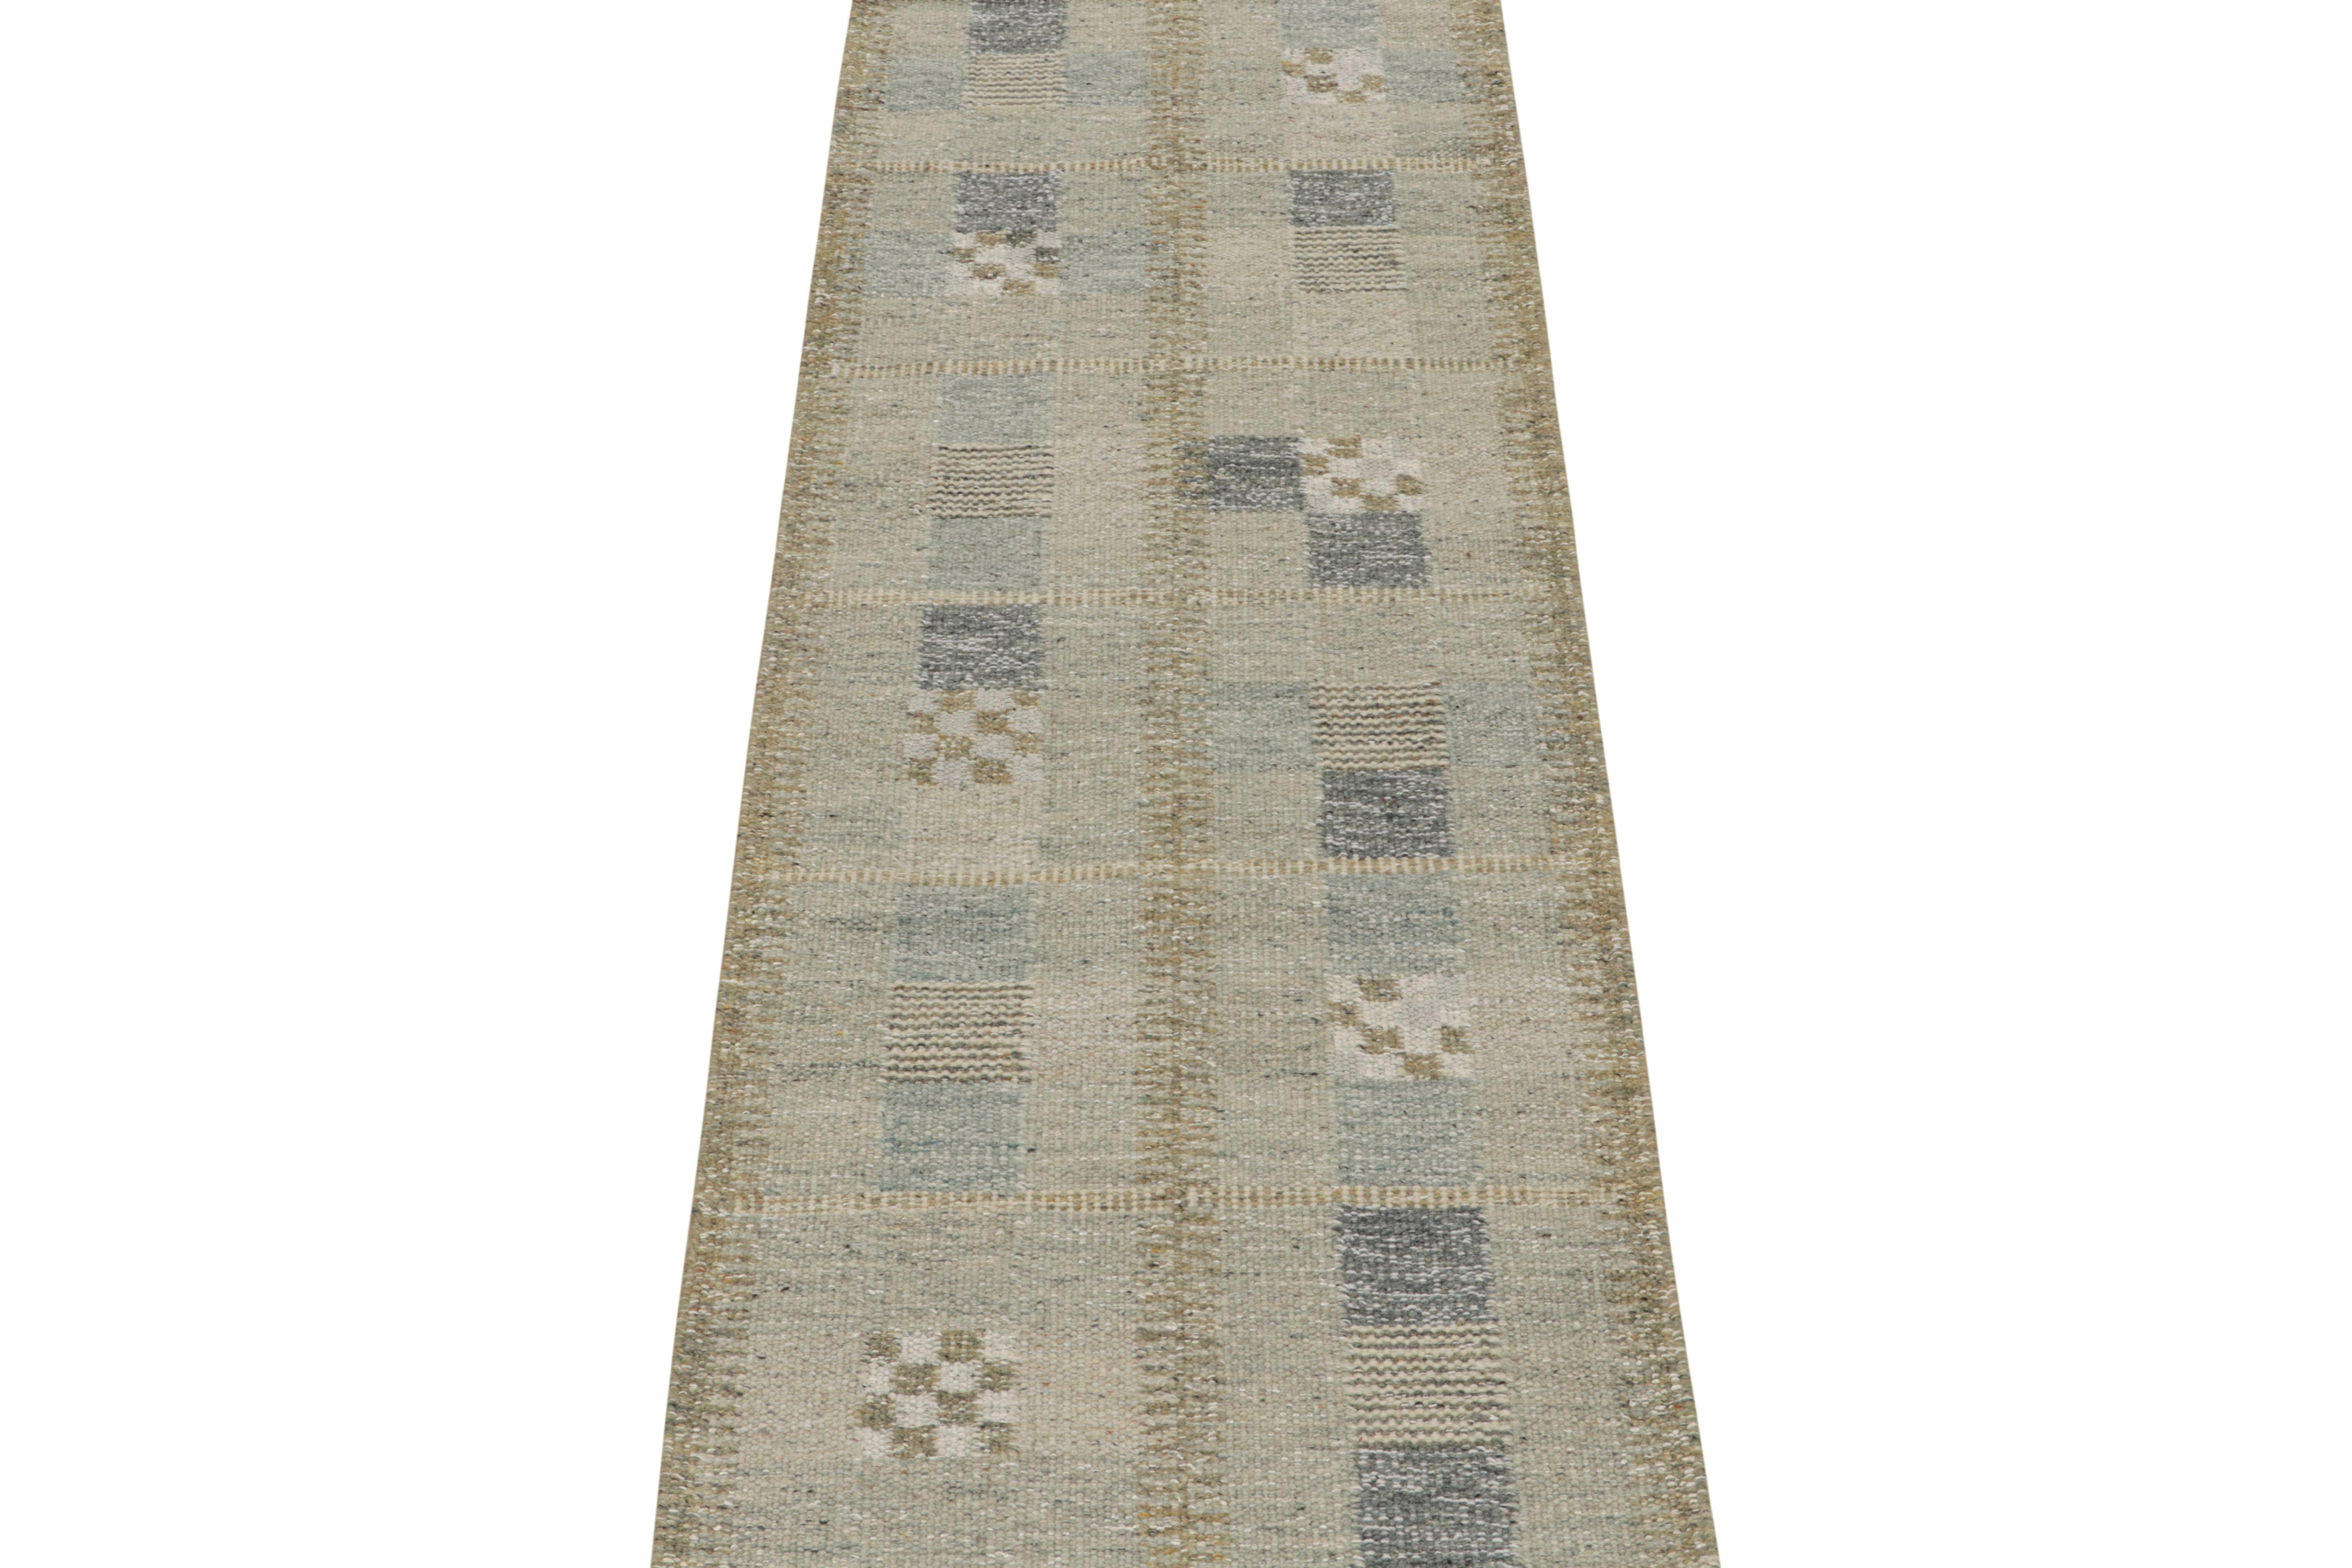 A smart 3x8 Swedish style kilim from our award-winning Scandinavian flat weave collection. Handwoven in wool & undyed natural yarn.

On the Design: 

This runner enjoys geometric patterns in cool blue & gray. Keen eyes will admire undyed, natural